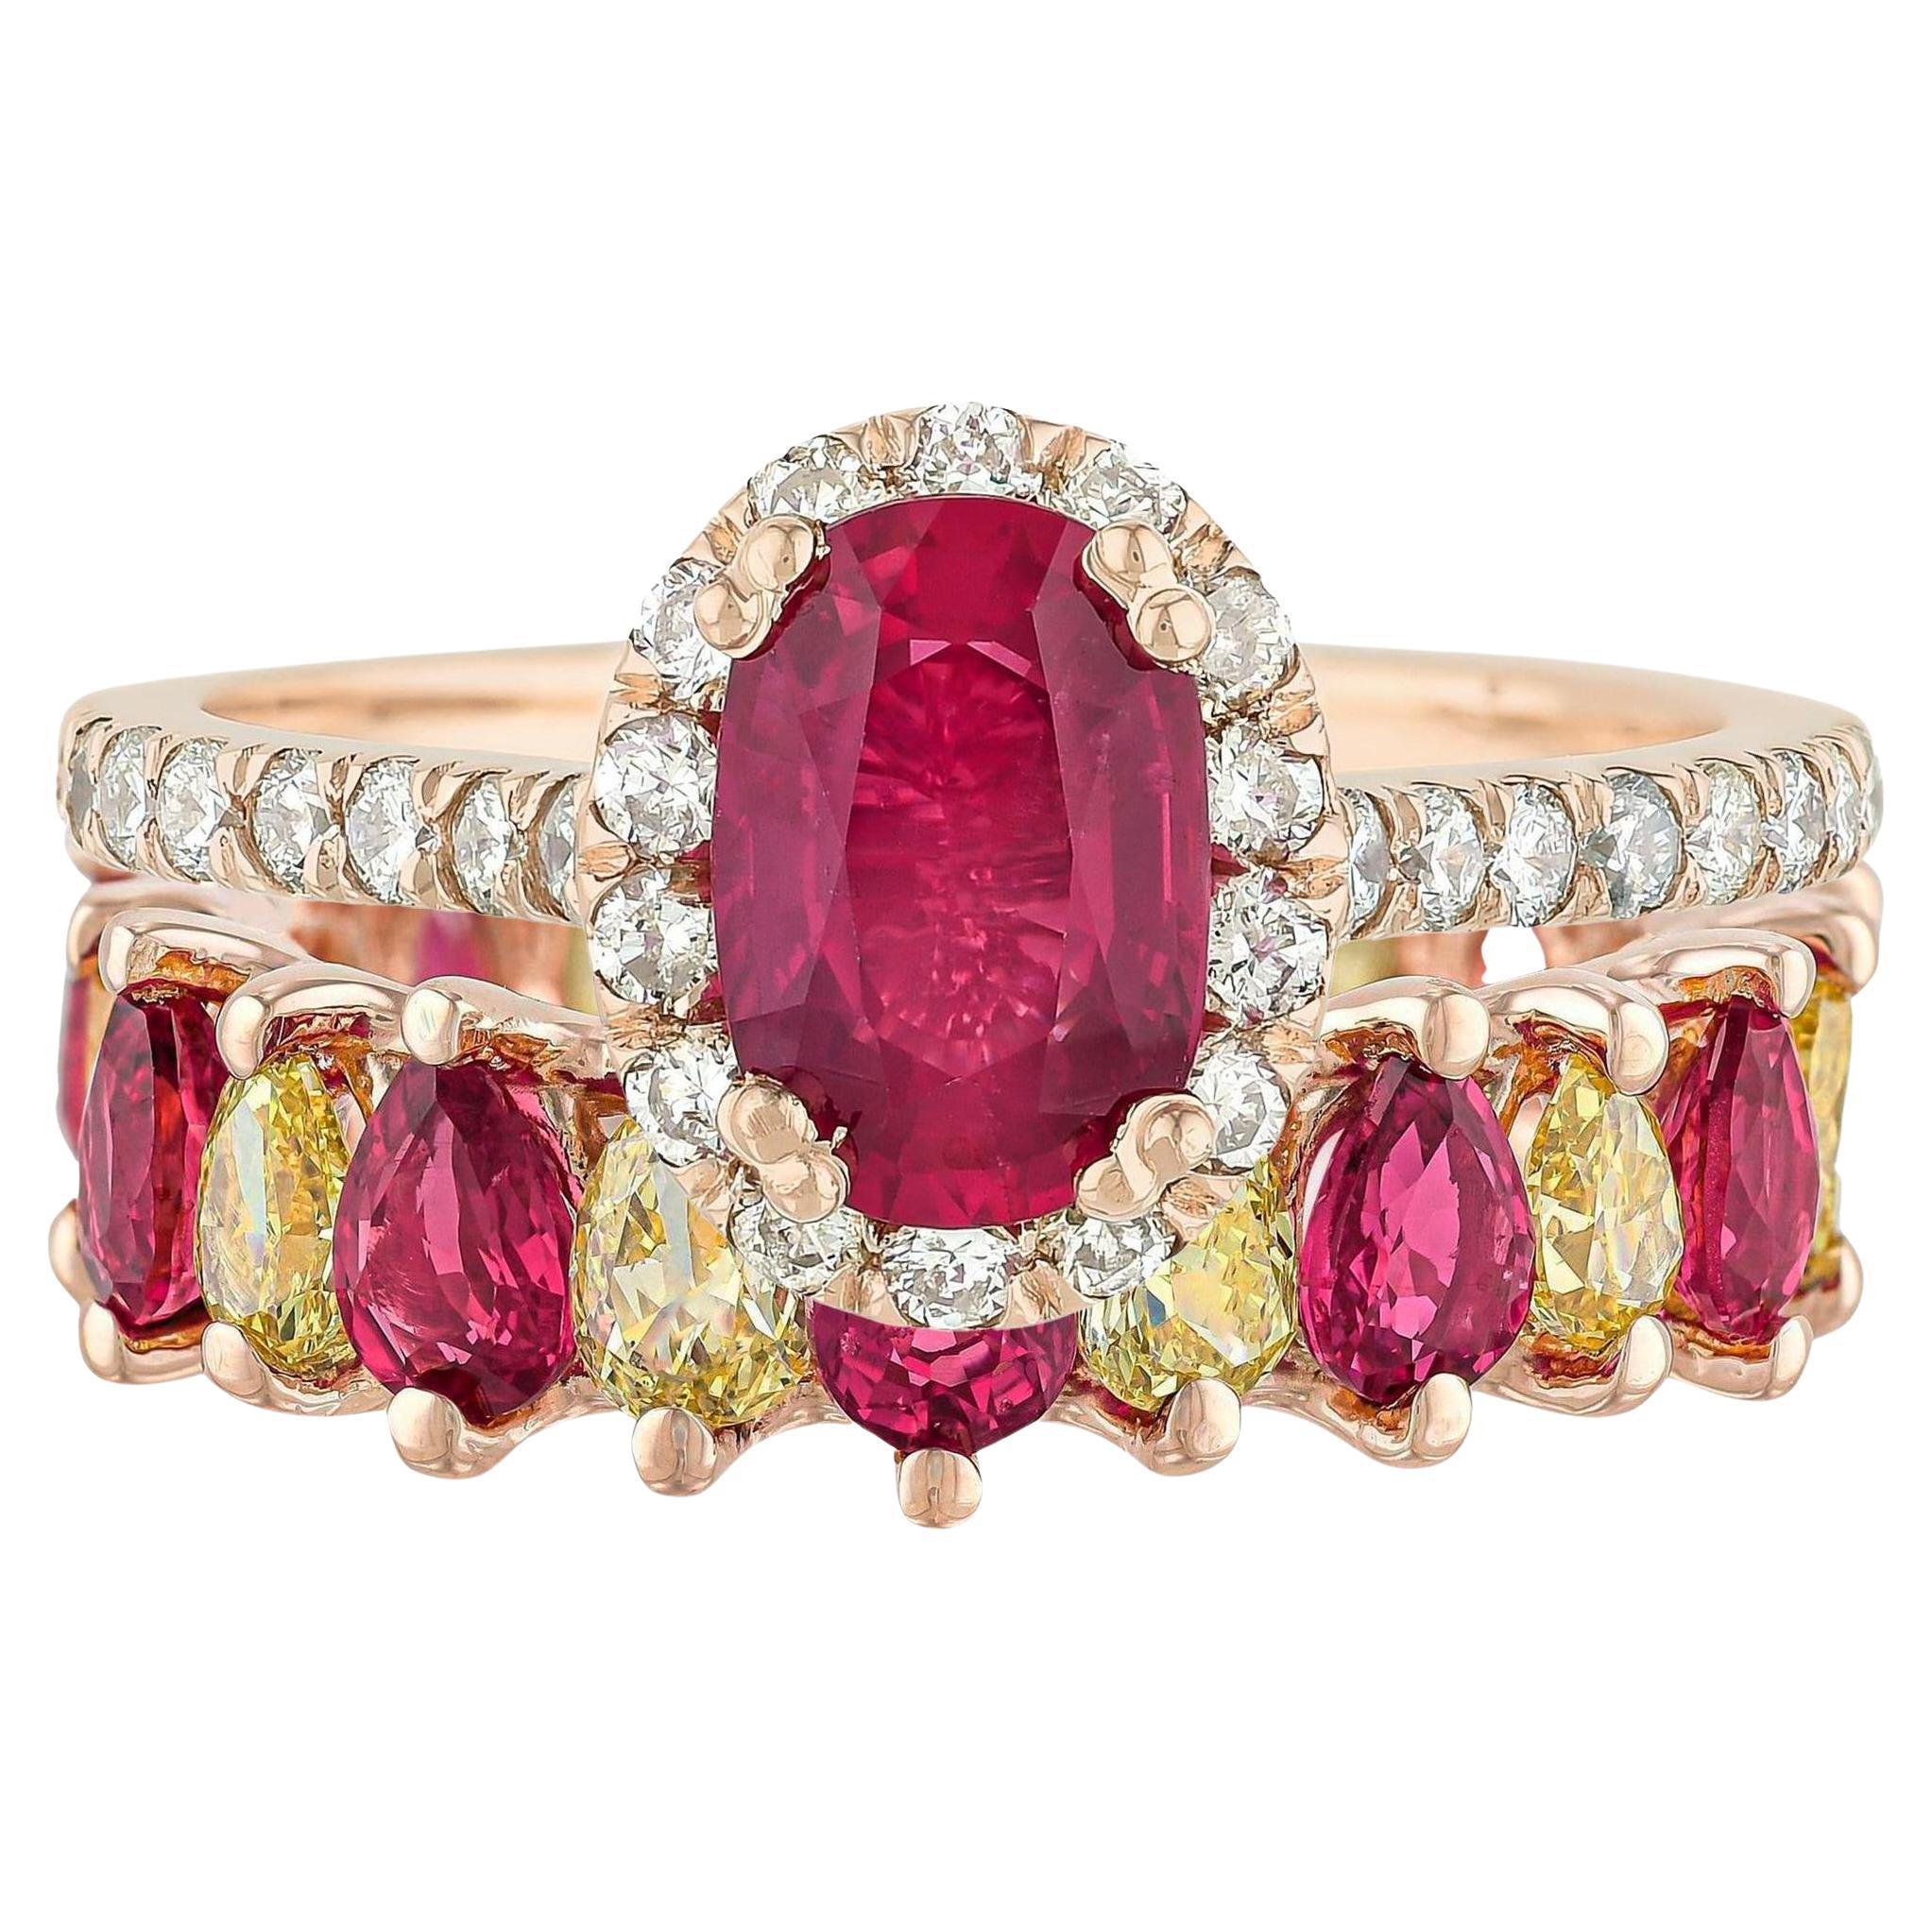 It comes with the Original GIA Certificate #2225505847
All Gemstones are Natural
The set consists from two rings

Main Ring Details:
Natural Unheated Ruby = 1.10 Carat
(Cut: Oval, Color: Red)
Diamonds = 0.45 Carats
(Color: F-G, Clarity: